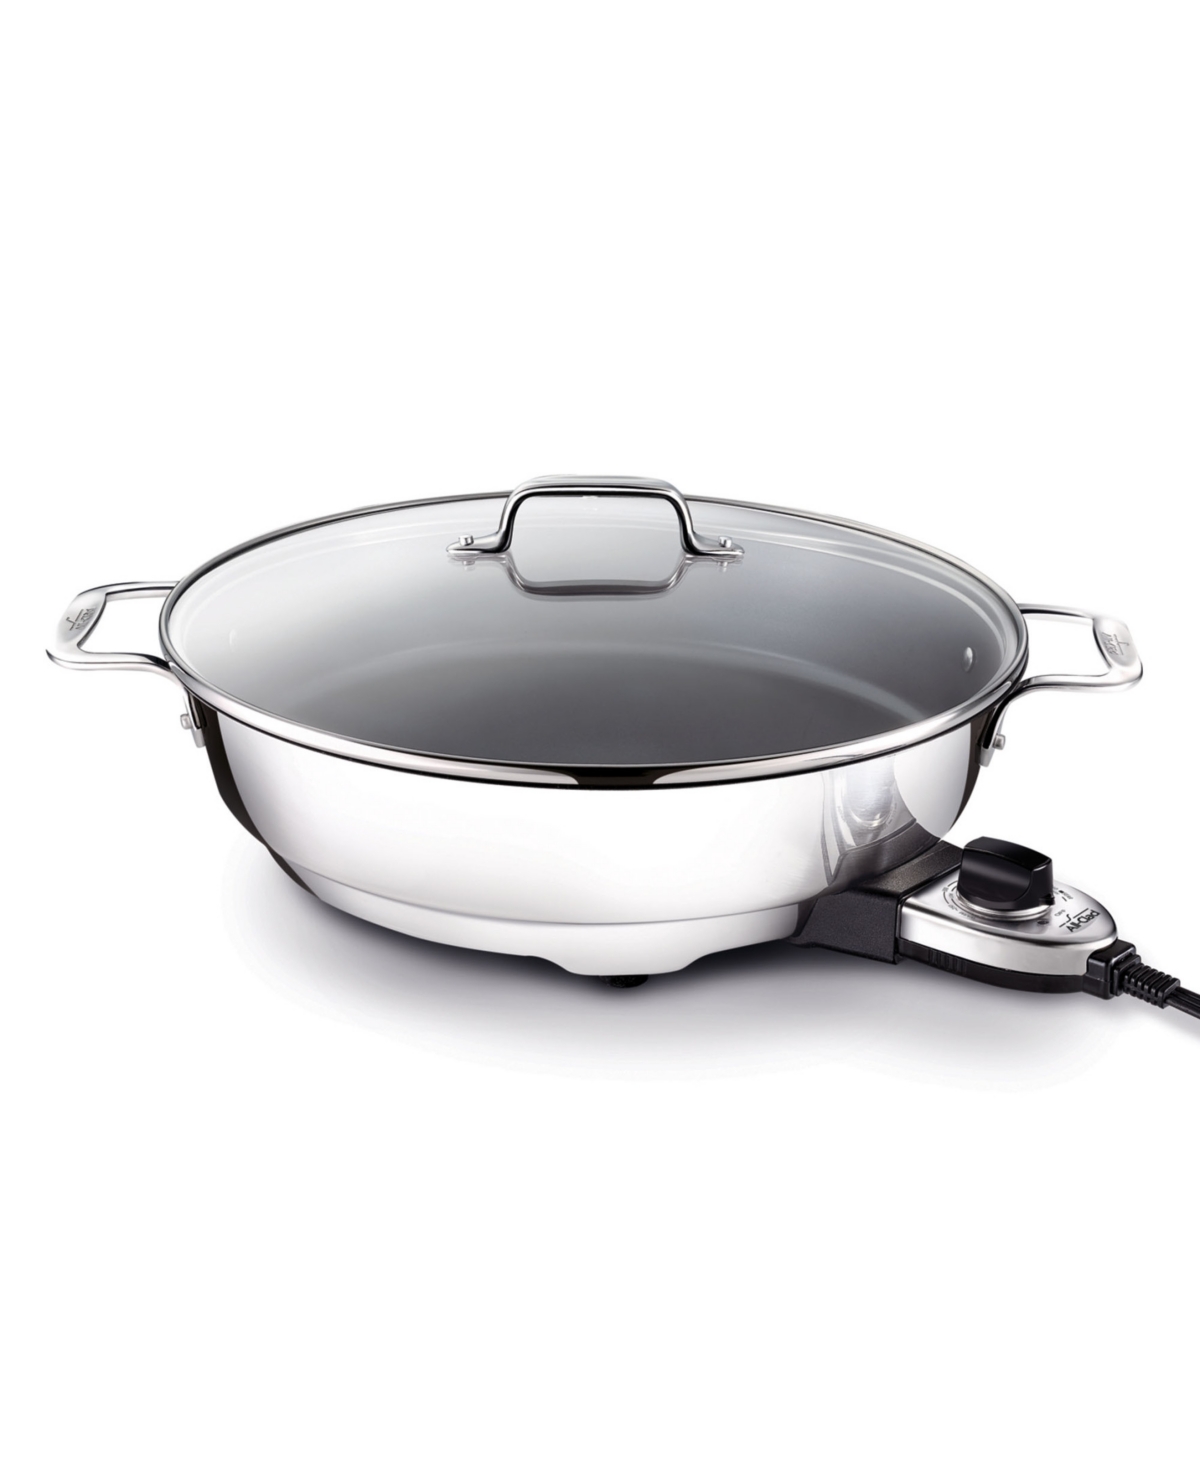 All-clad 7 Quart Electric Nonstick Skillet In Silver